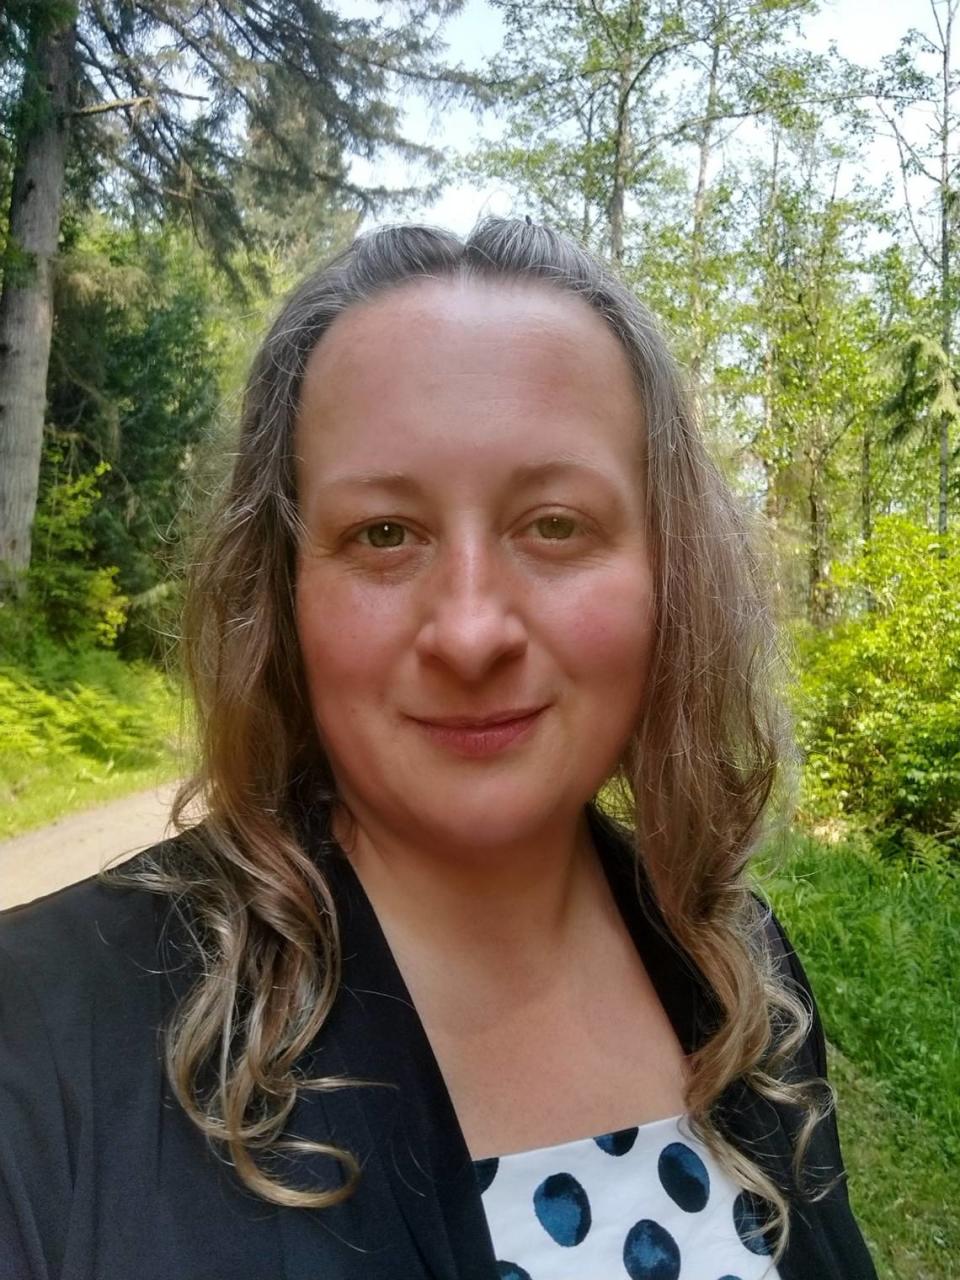 Katherine Orlowski is one of three people running for the District 4 seat on the Whatcom County Council in the Aug. 1 primary election. Katherine Orlowski/Courtesy to The Bellingham Herald